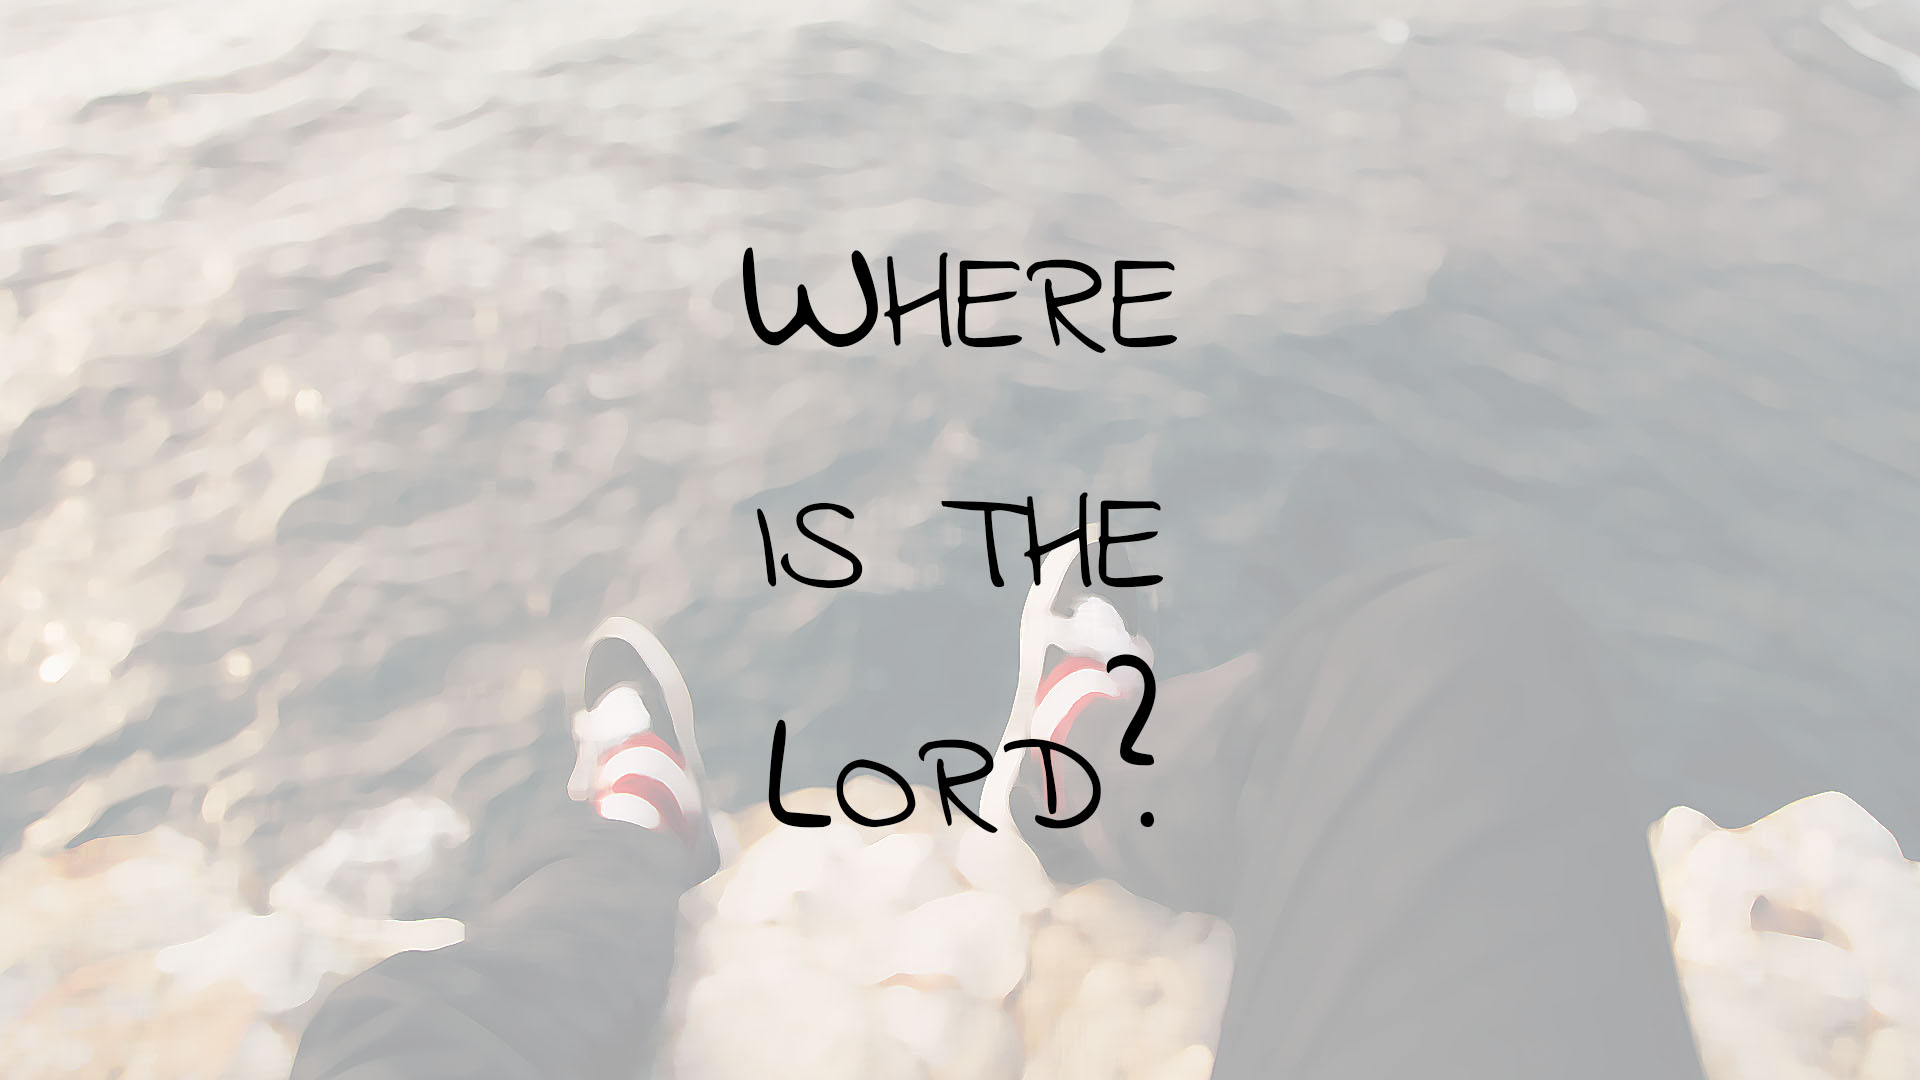 Where is the Lord?